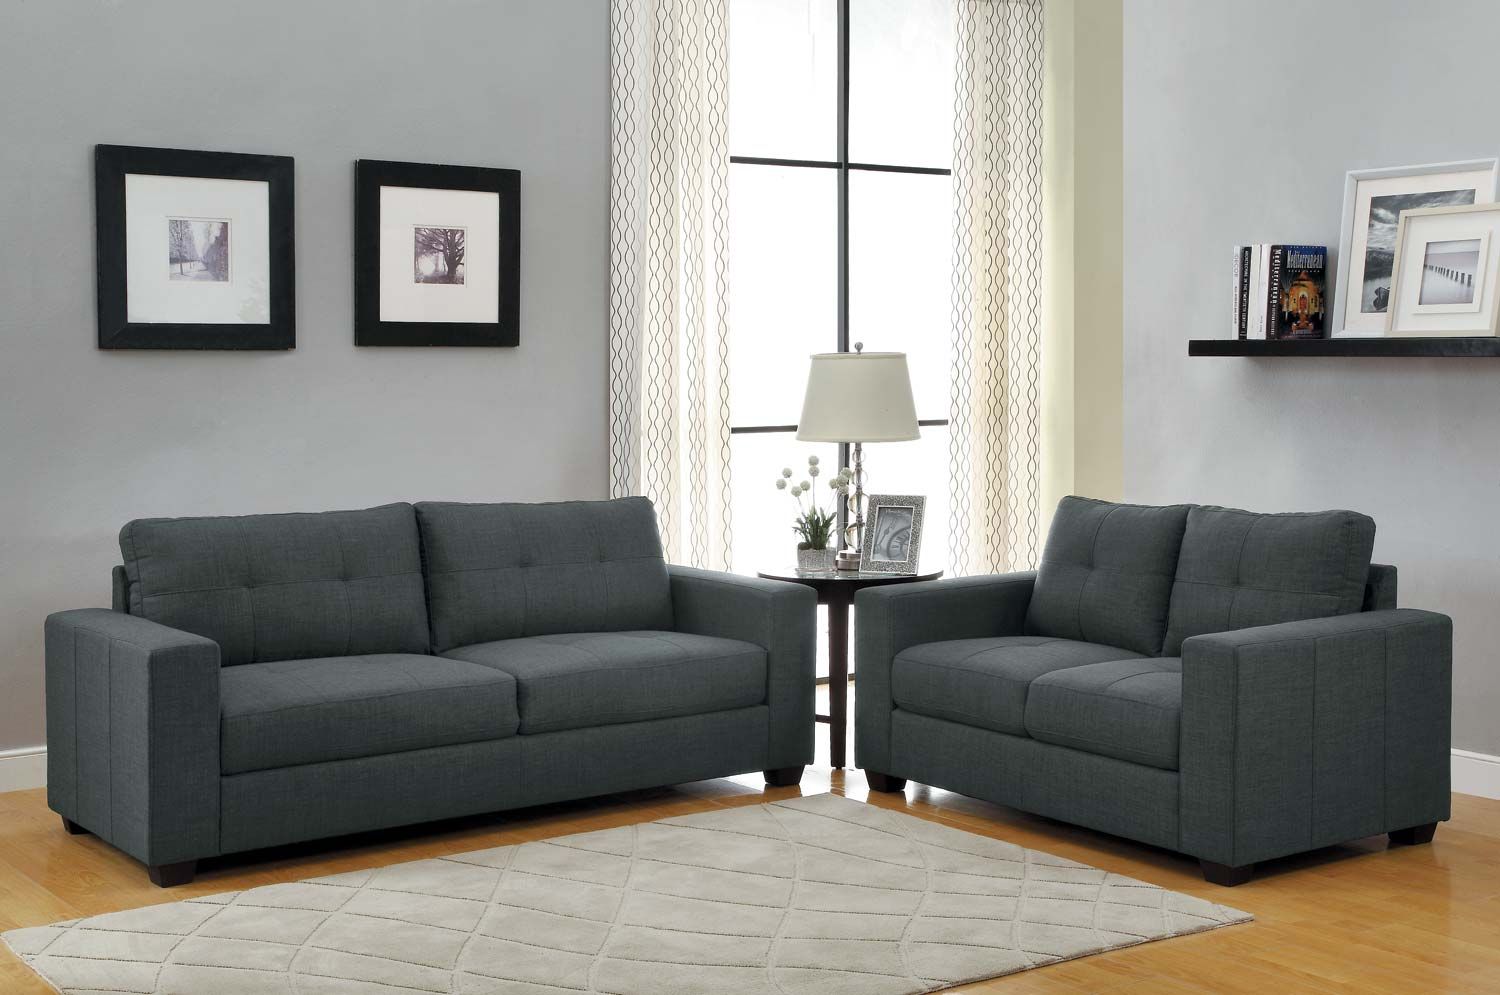 Seating Luxury: Finding the Perfect Sofa Set for Sale on Black Friday